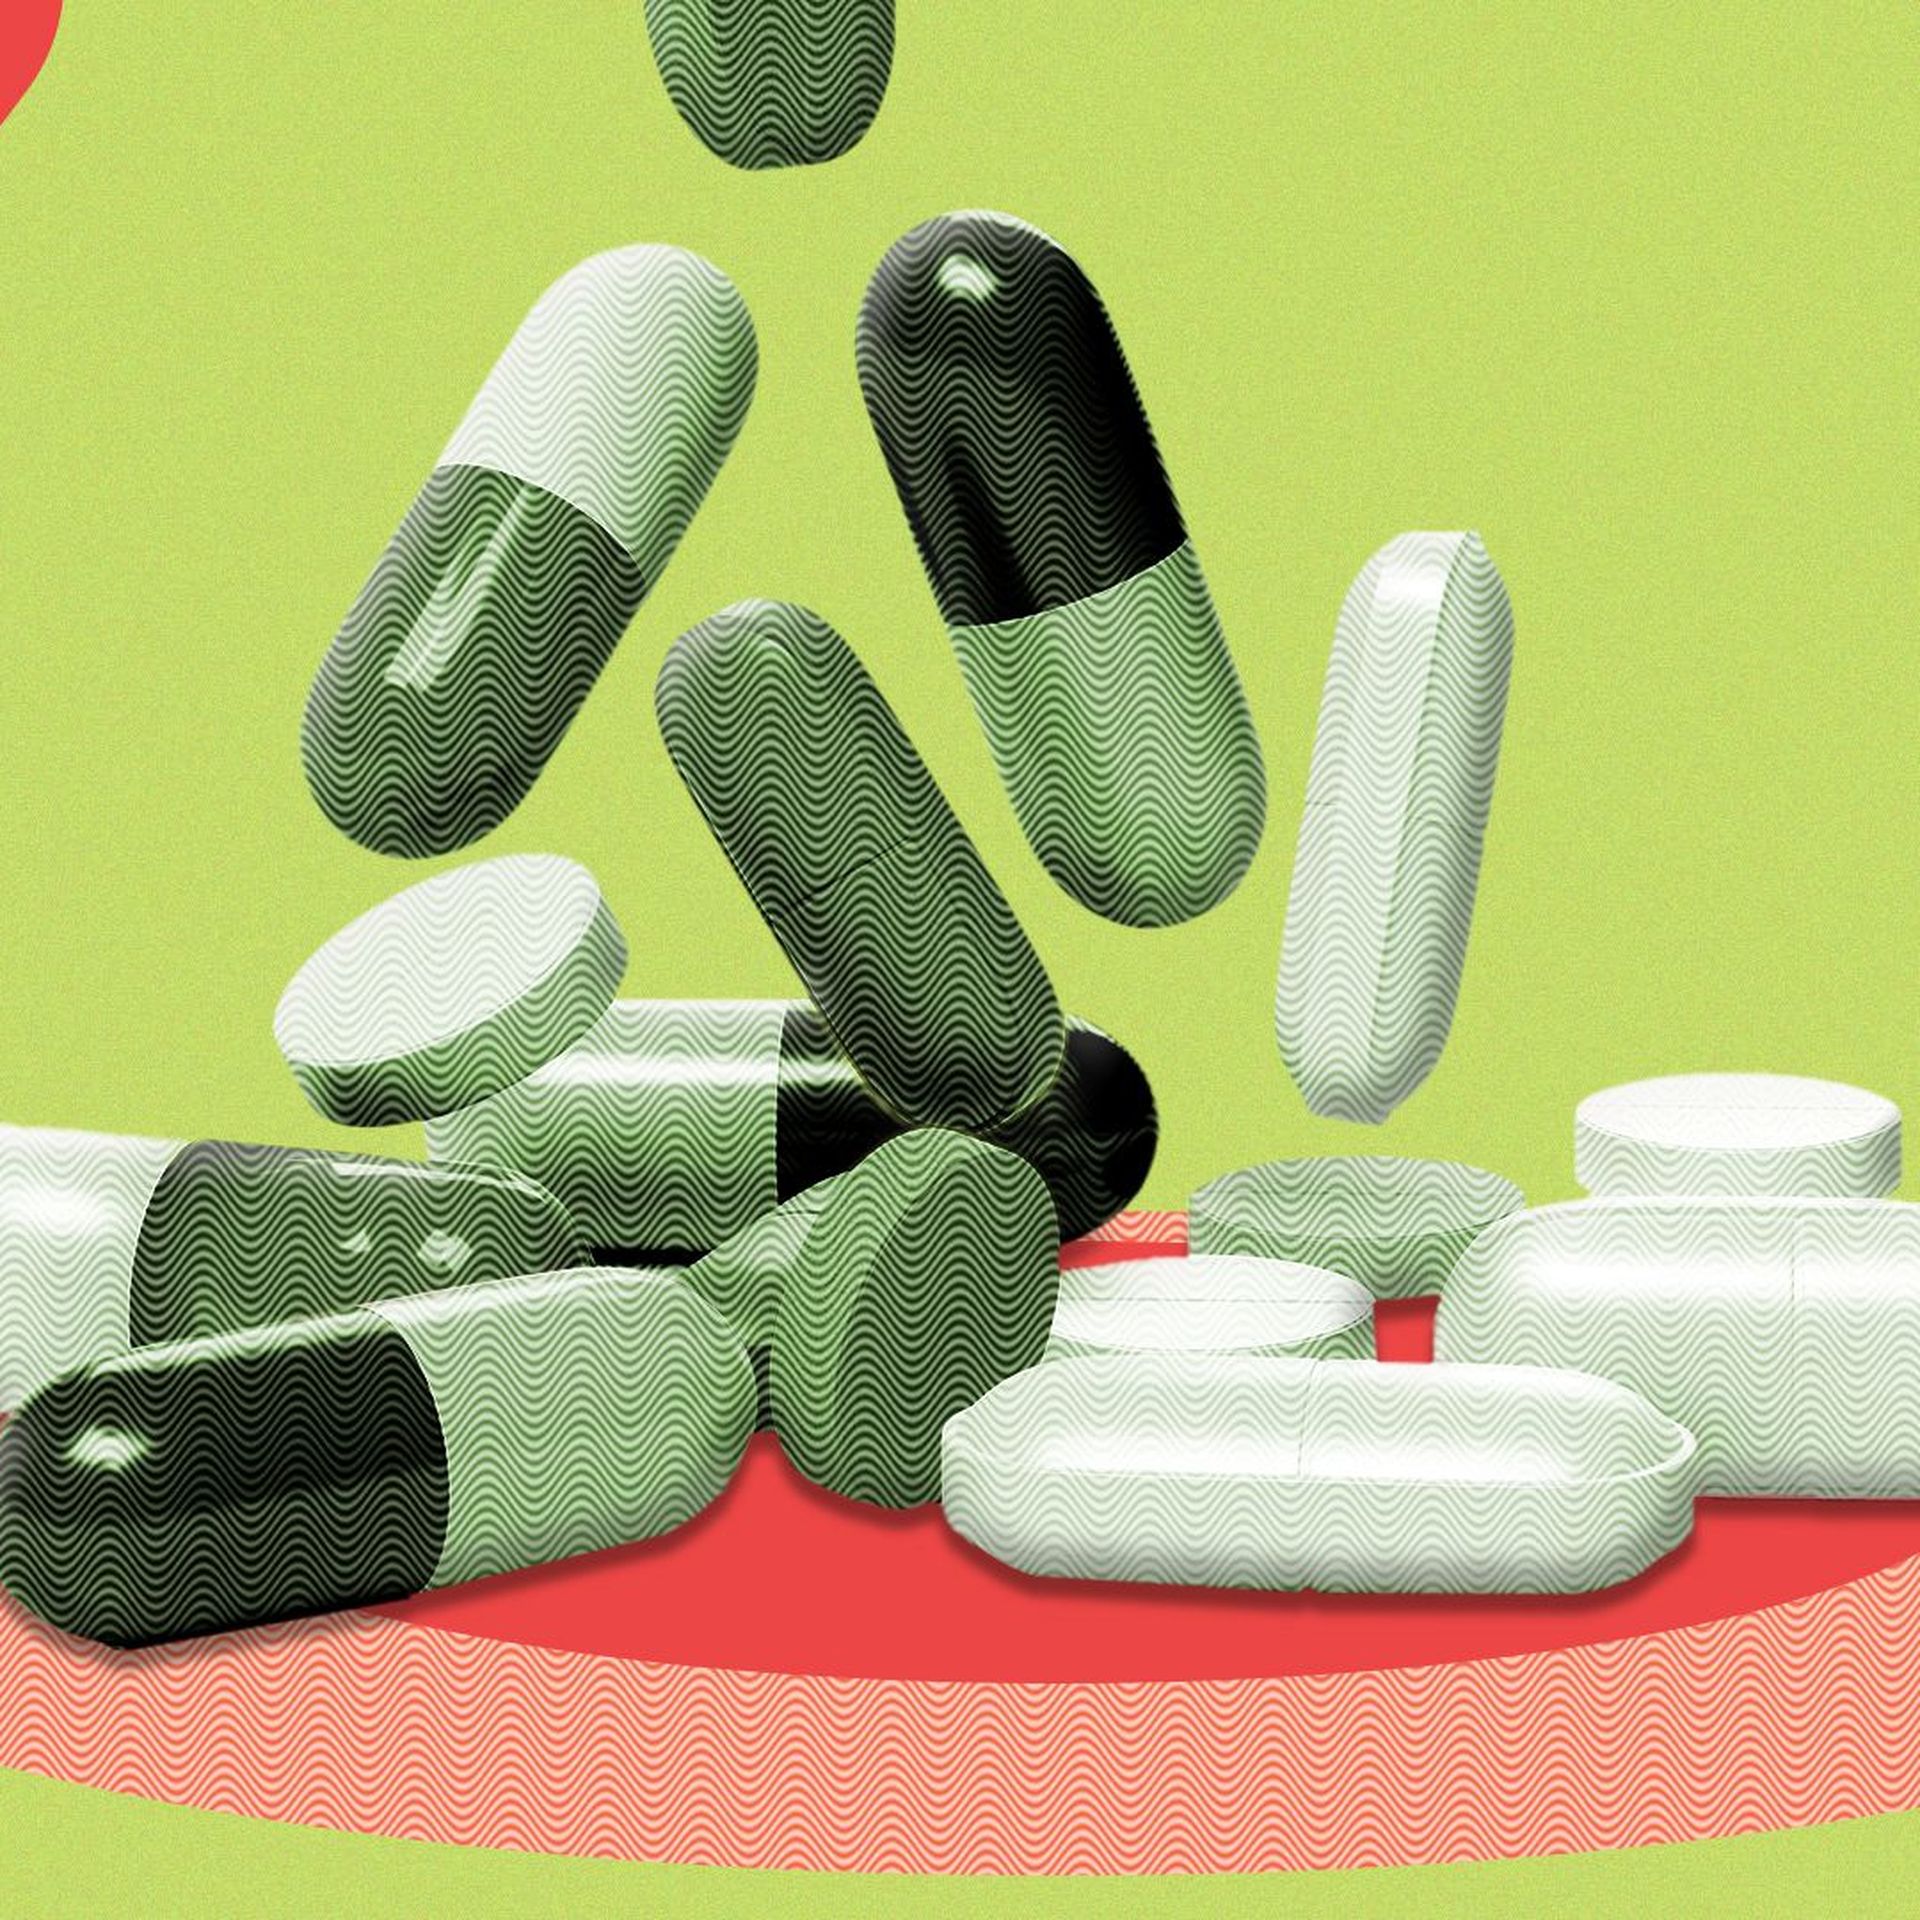 Illustration of falling pills surrounded by abstract shapes and sections of dollars.